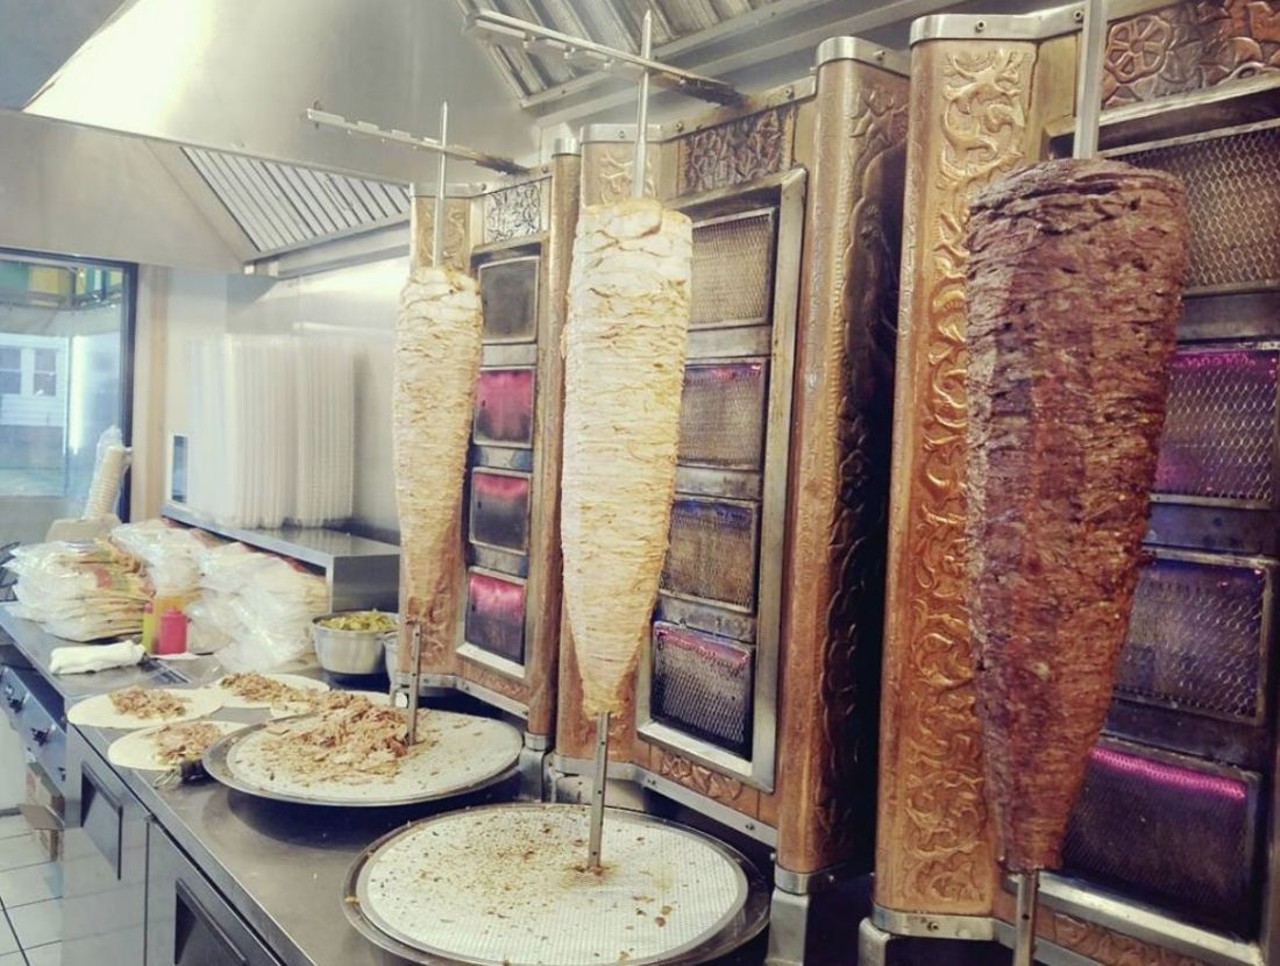  Ferris Shwarma
13507 Lakewood Heights Blvd., Lakewood
Their website says they have &#147;the most awesome shwarma in Cleveland.&#148; Who are we to argue? This menu is very straightforward with only a few options but when you do something so well, no need to mess with what is working.
Photo via @Arabs_In_Cleveland/Instagram